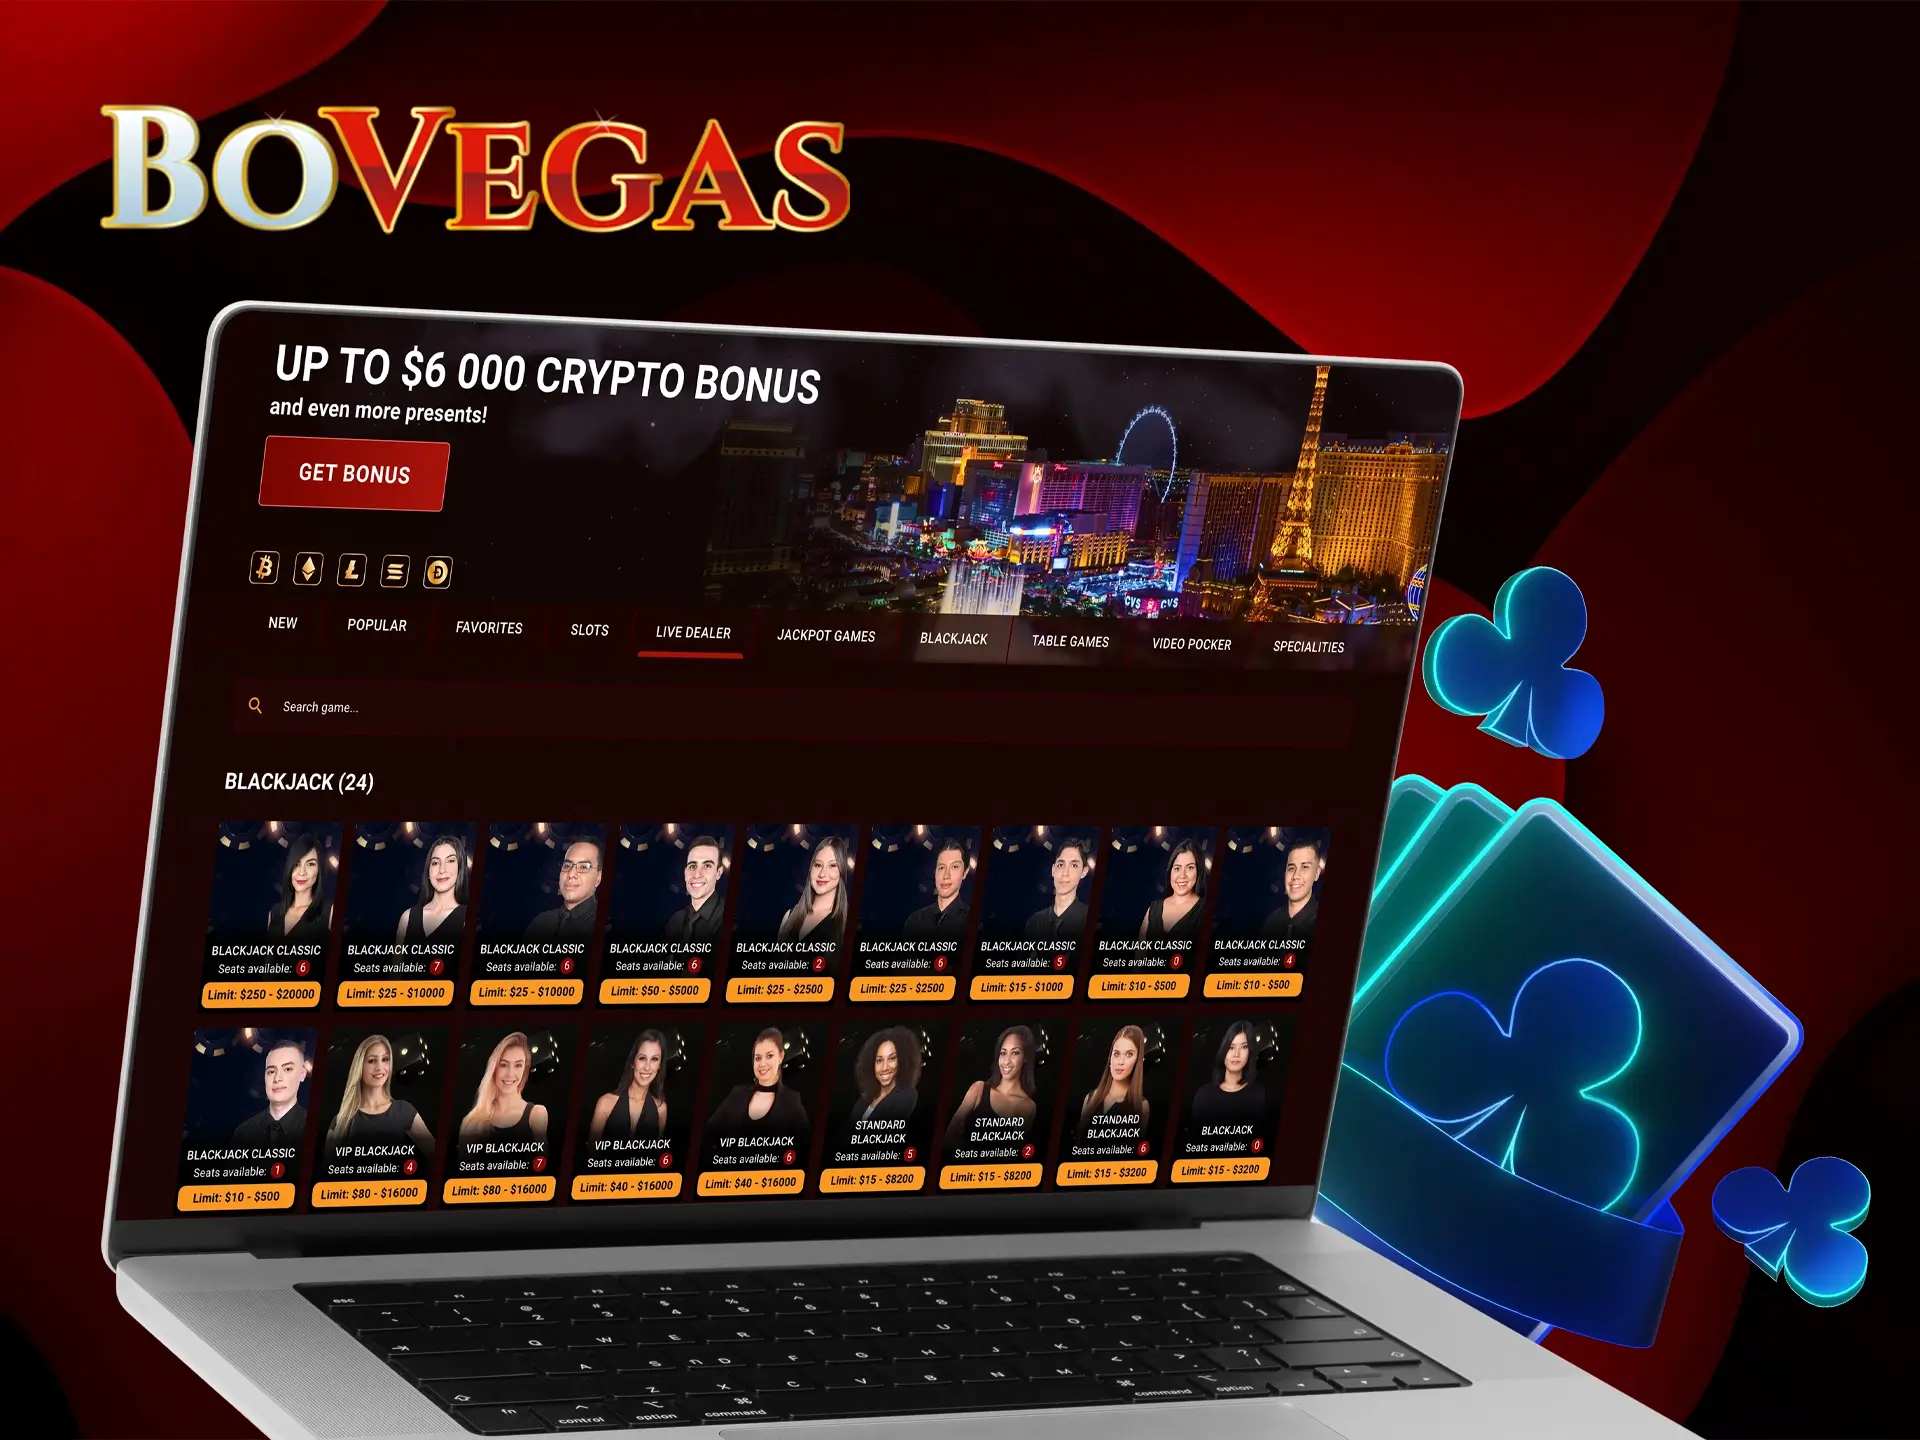 Use your skills and expertise when playing with real dealers at BoVegas Casino.